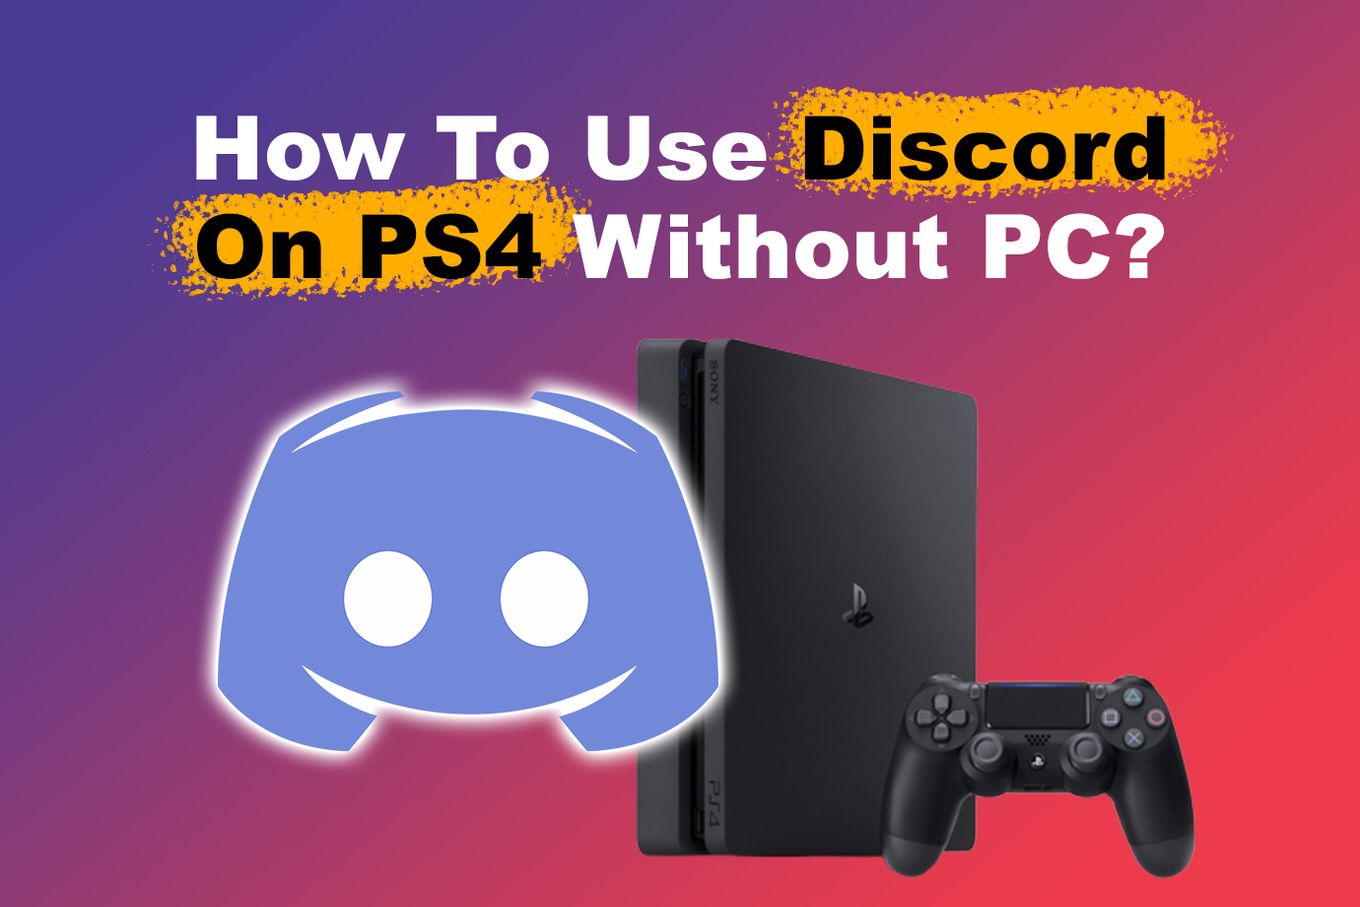 How To Use Discord On PS4 Without PC